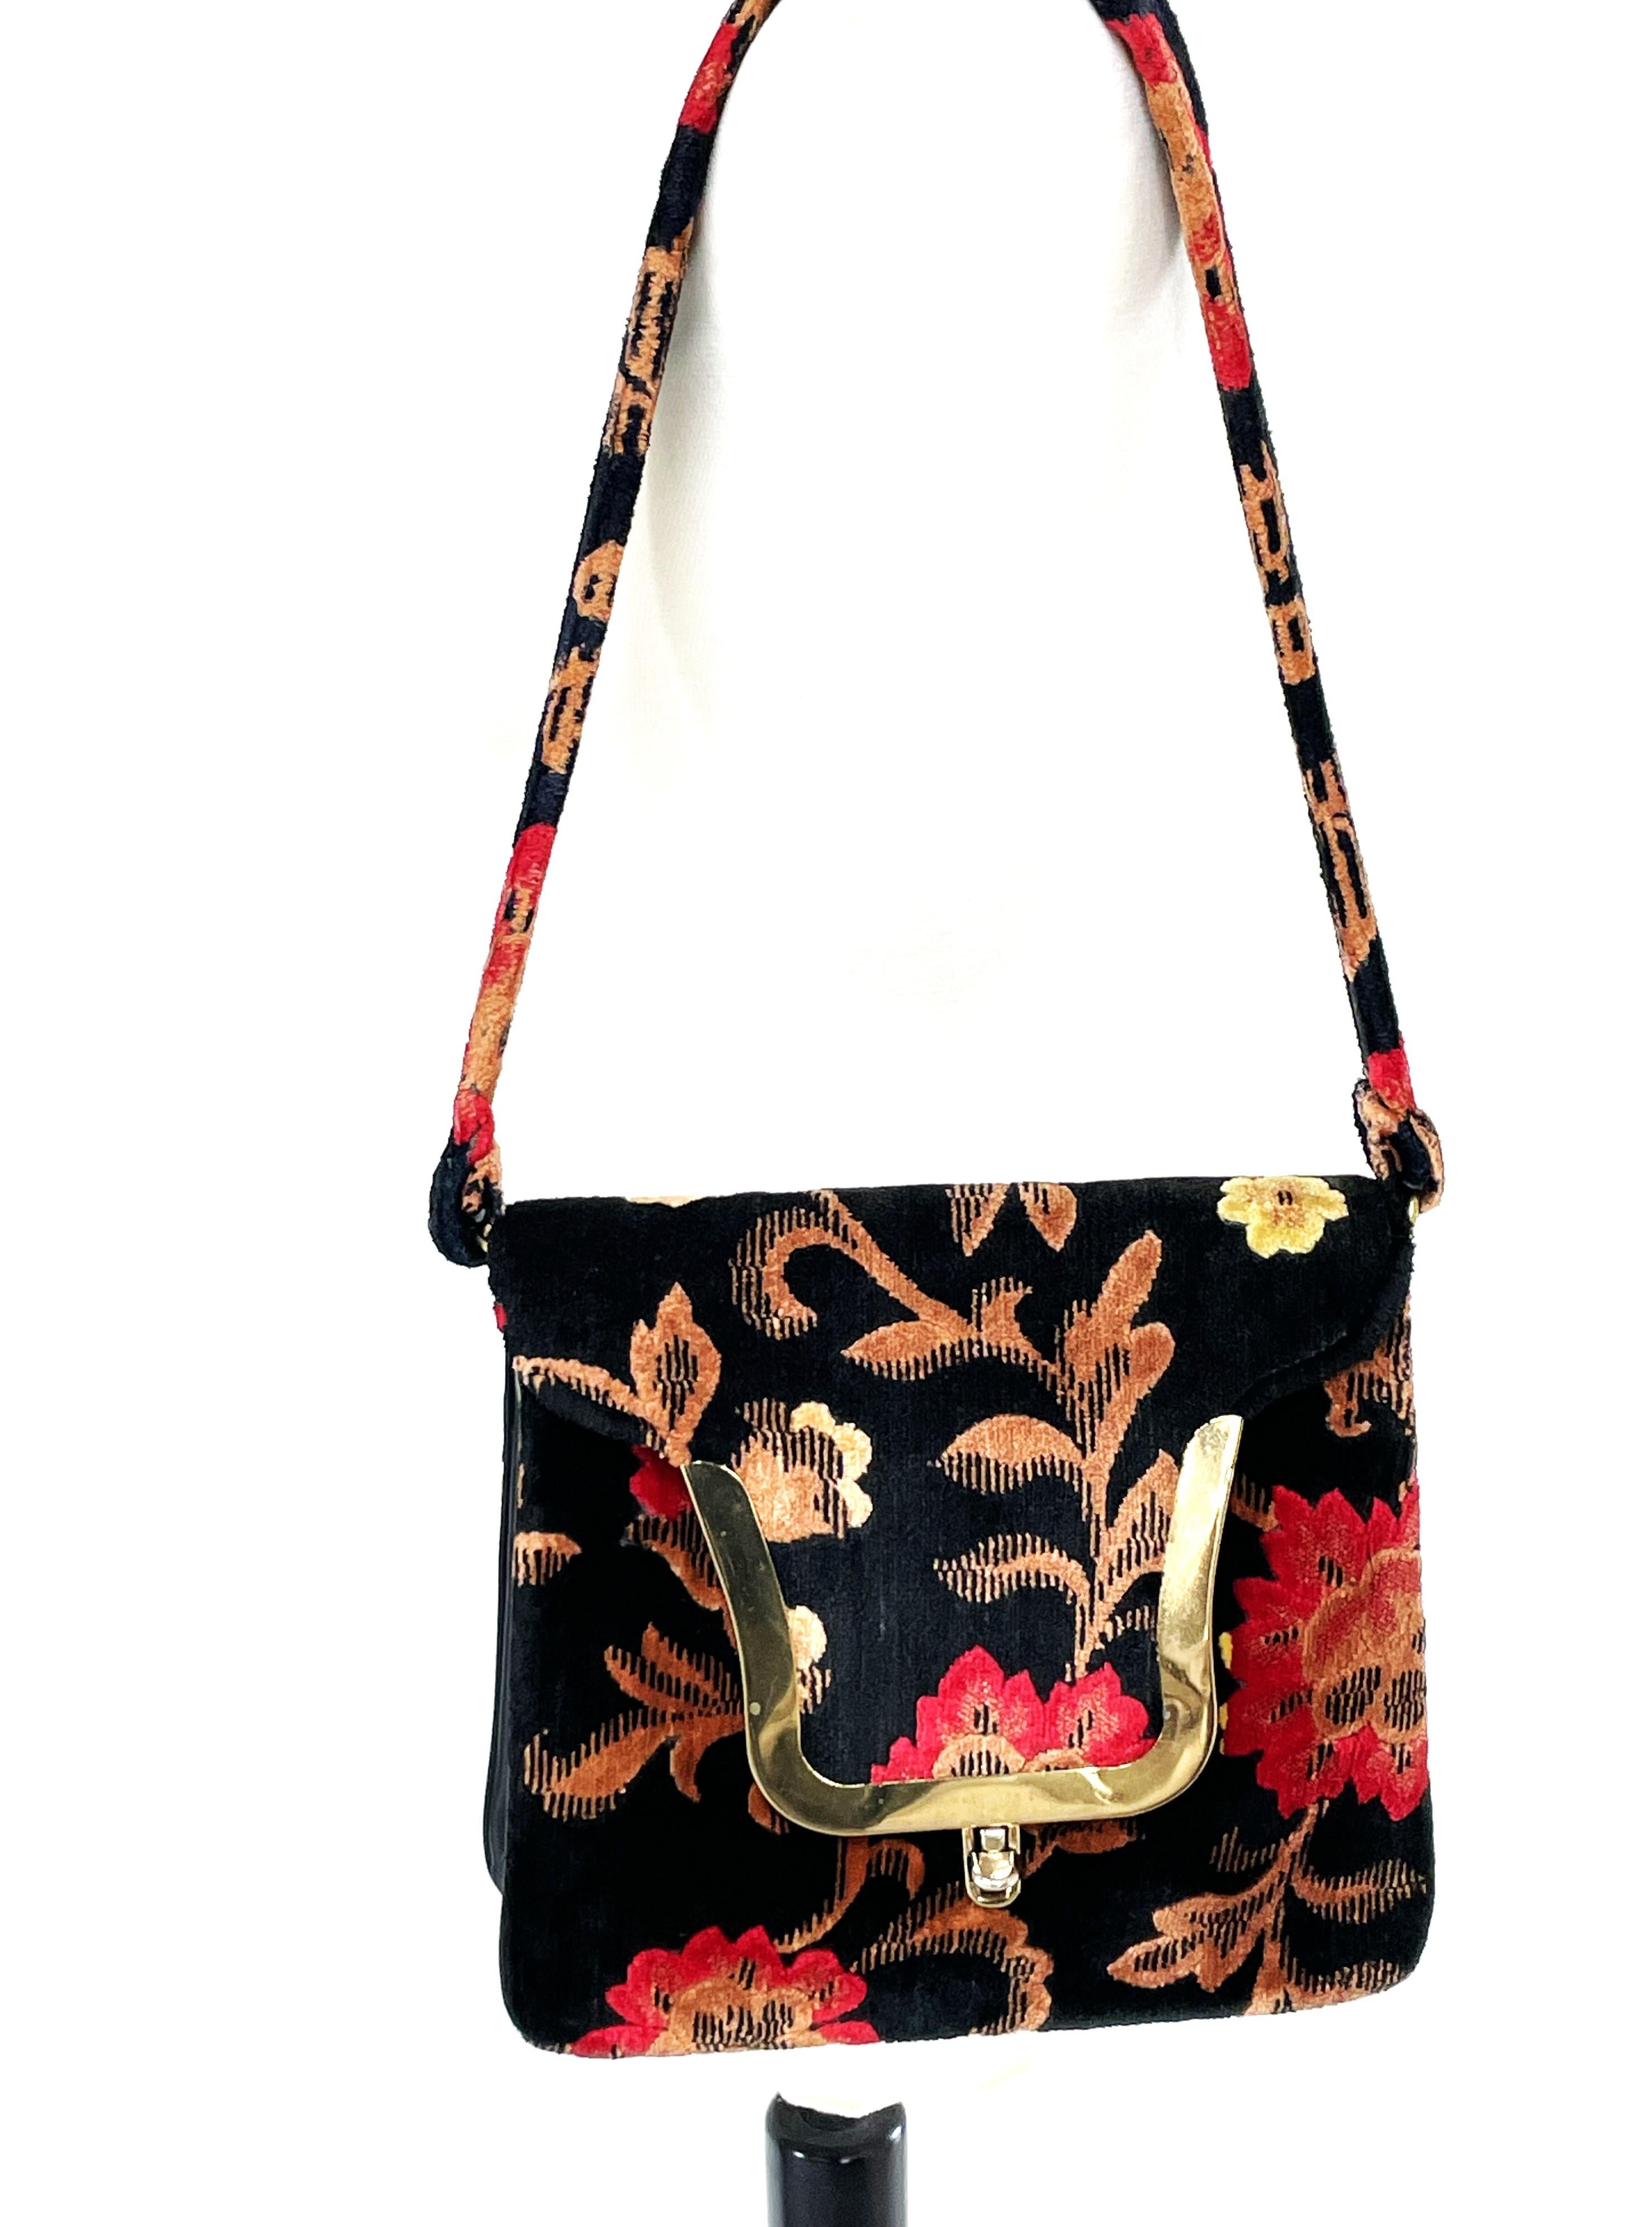 A fun young bag designed in the 1950s USA  with one longer handle made of printed Velvet/Chenille  in diferent colors.  
Lined with black skay/artificial leather, which is typical of the 50s. The bag has 3 high inner compartments, the middle